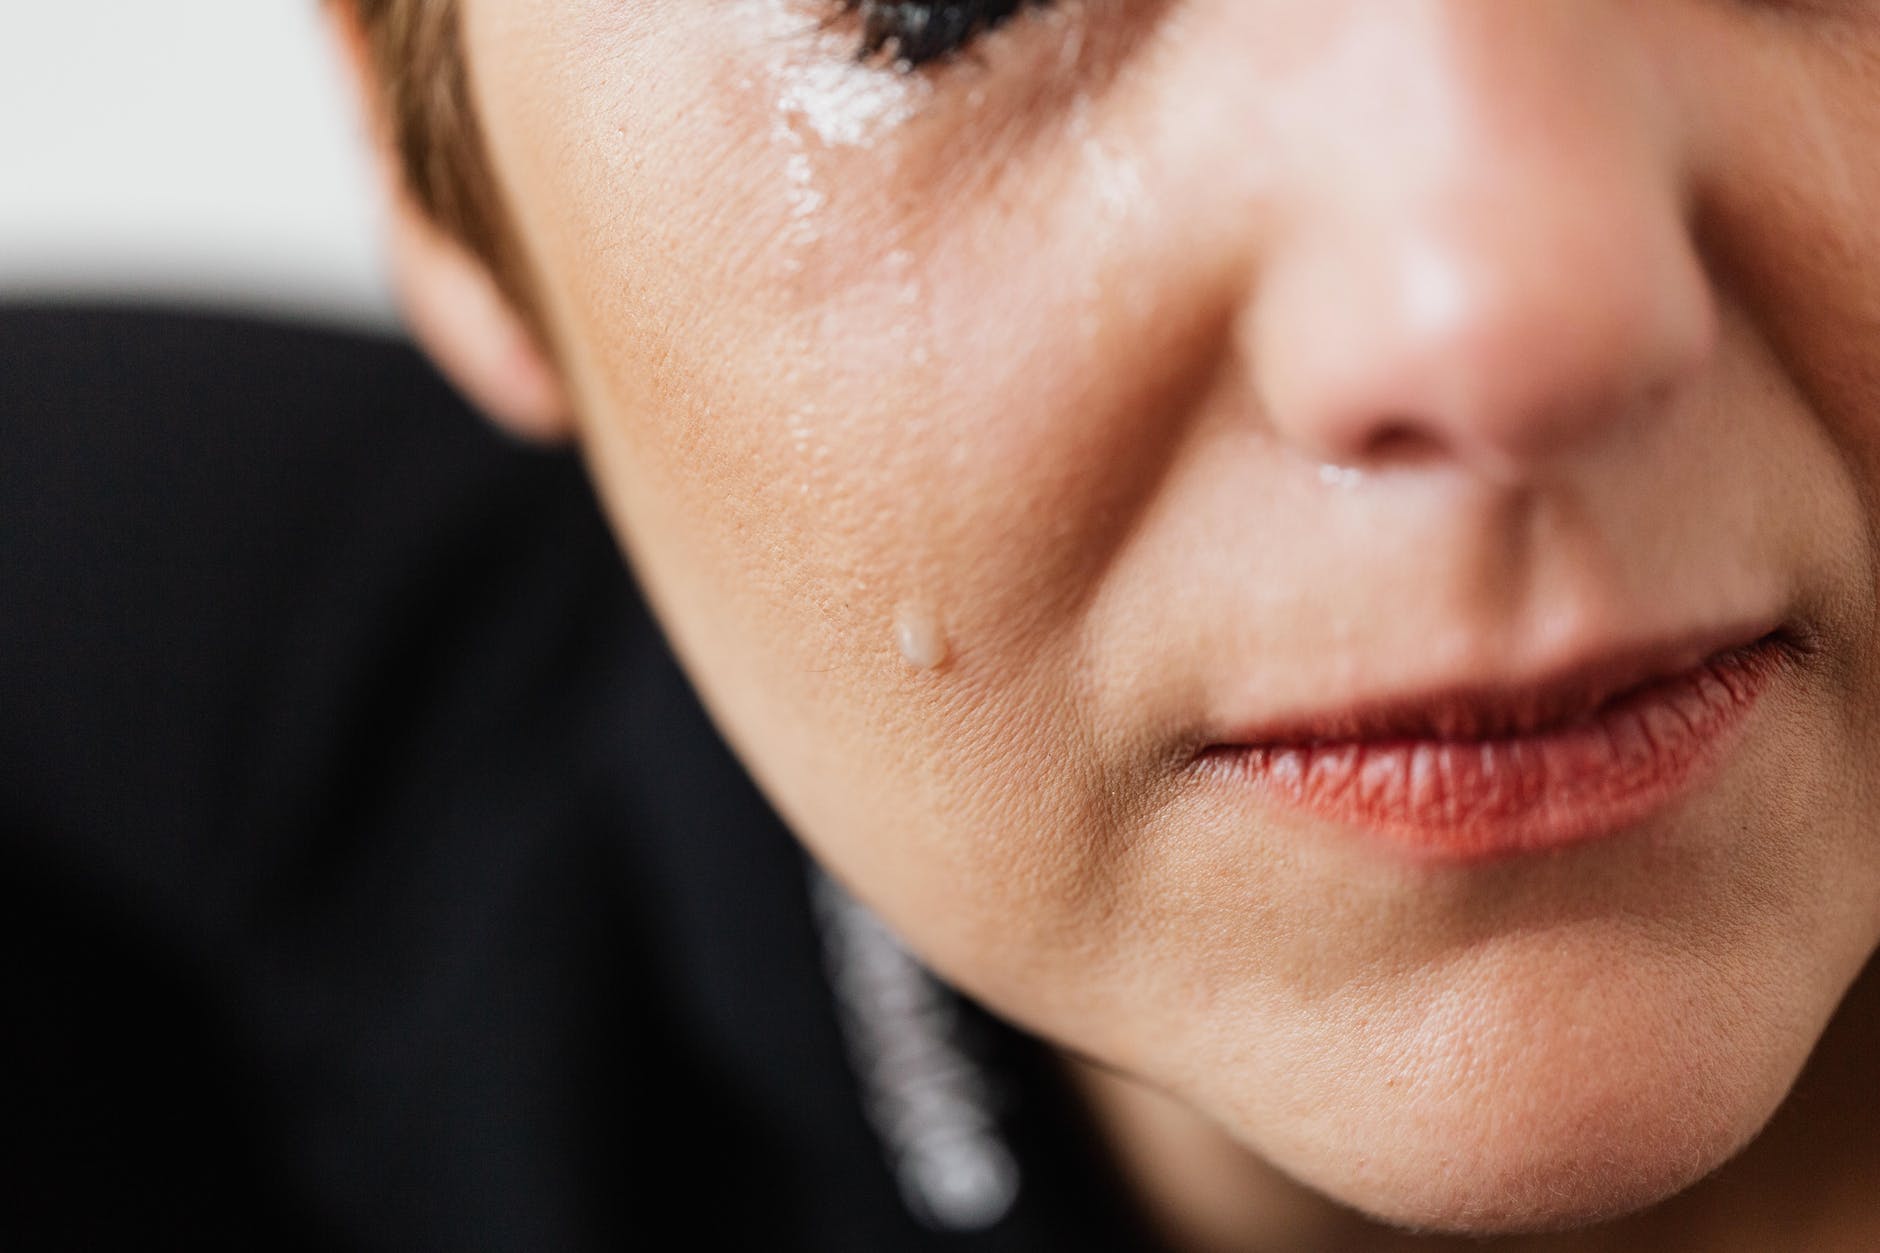 Their mother crying and trying to make her daughter see reason | Source: Pexels